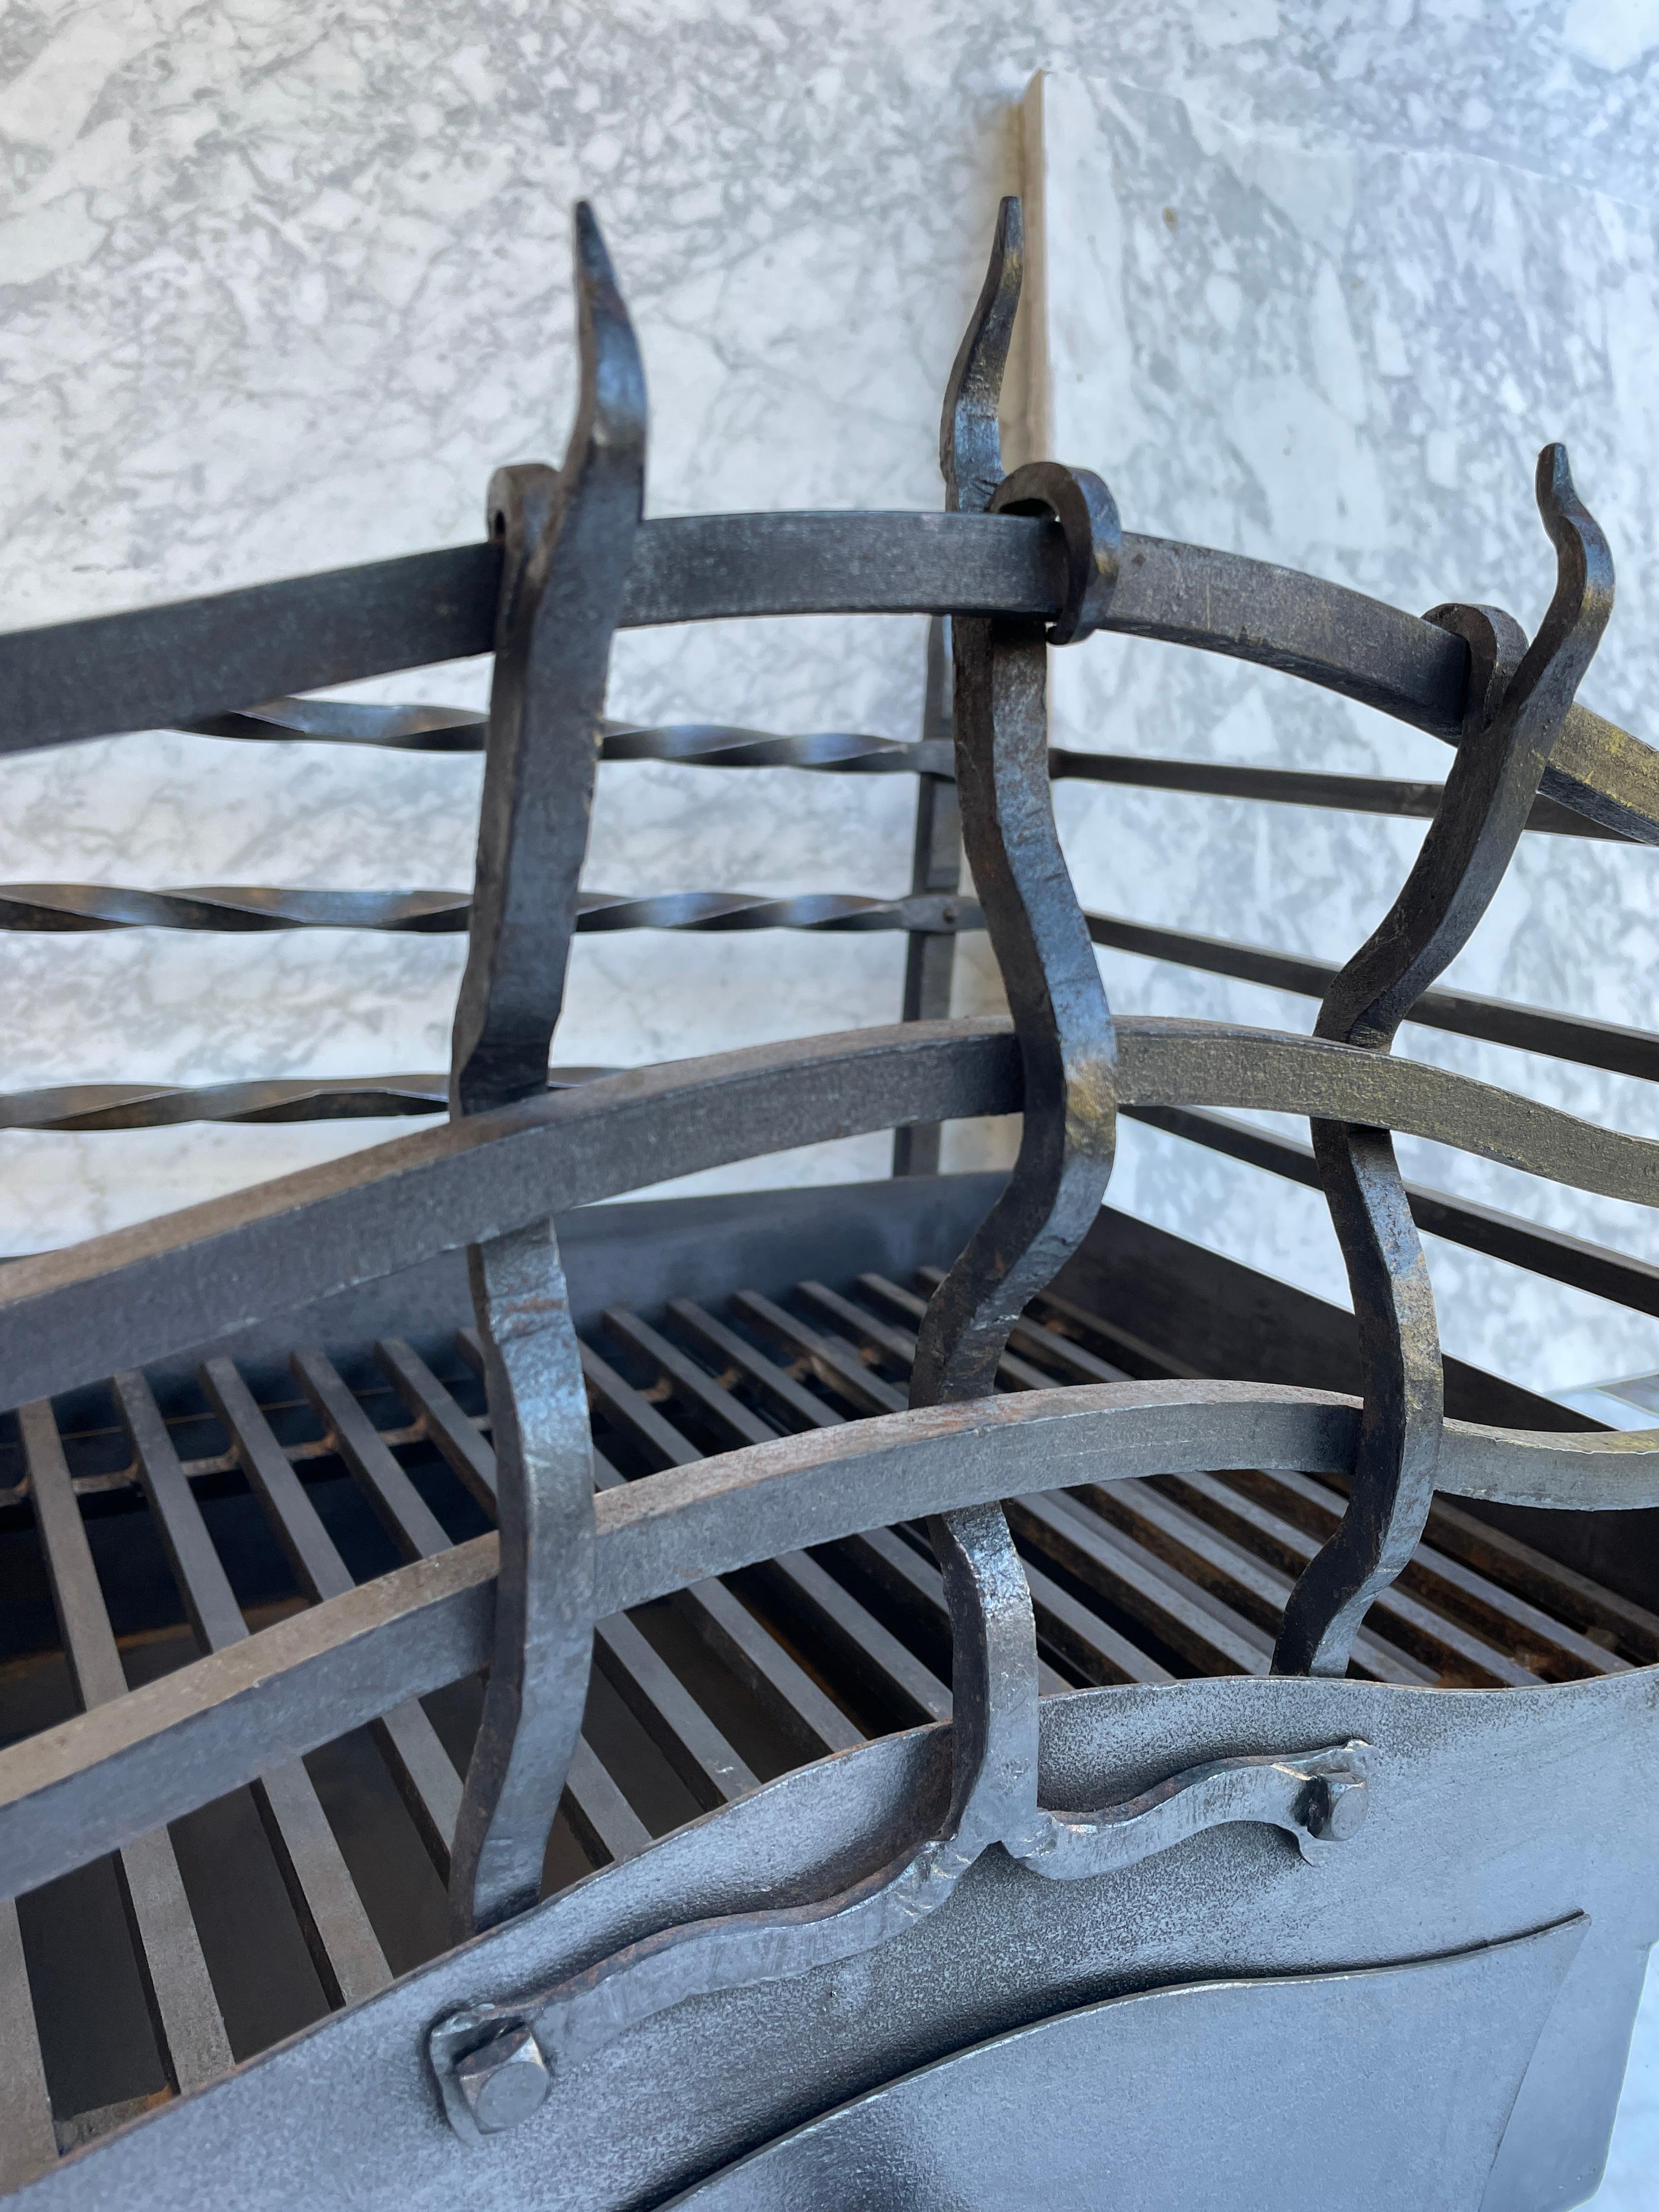 Wrought Iron Very Special Arts and Craft Movement Antique Fireplace Grate or Basket For Sale